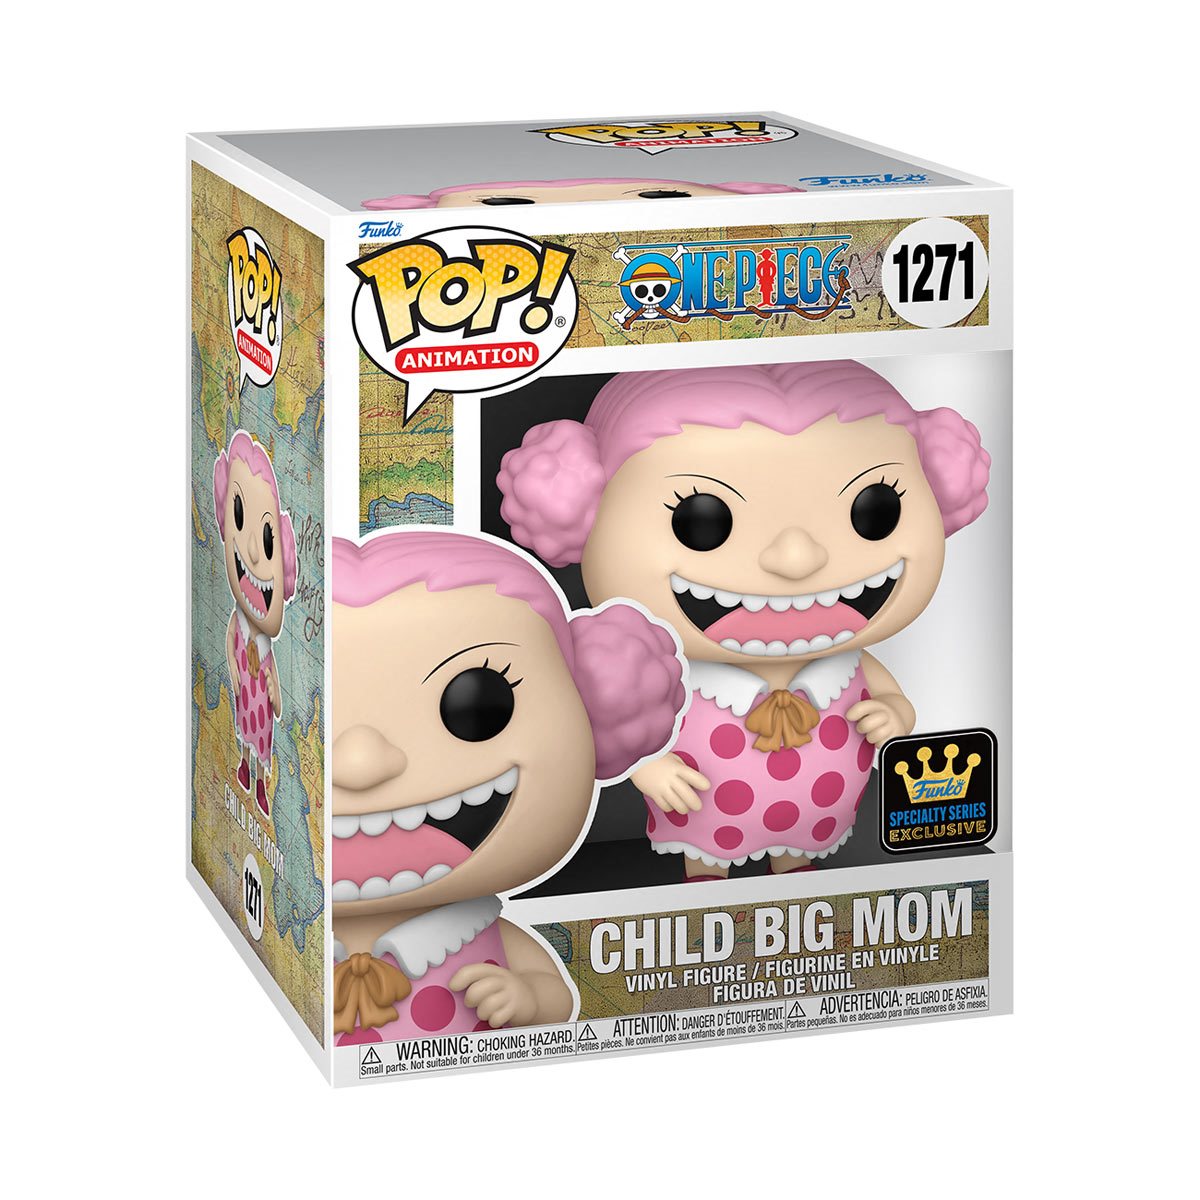 One Piece Child Big Mom 6-Inch Specialty Series